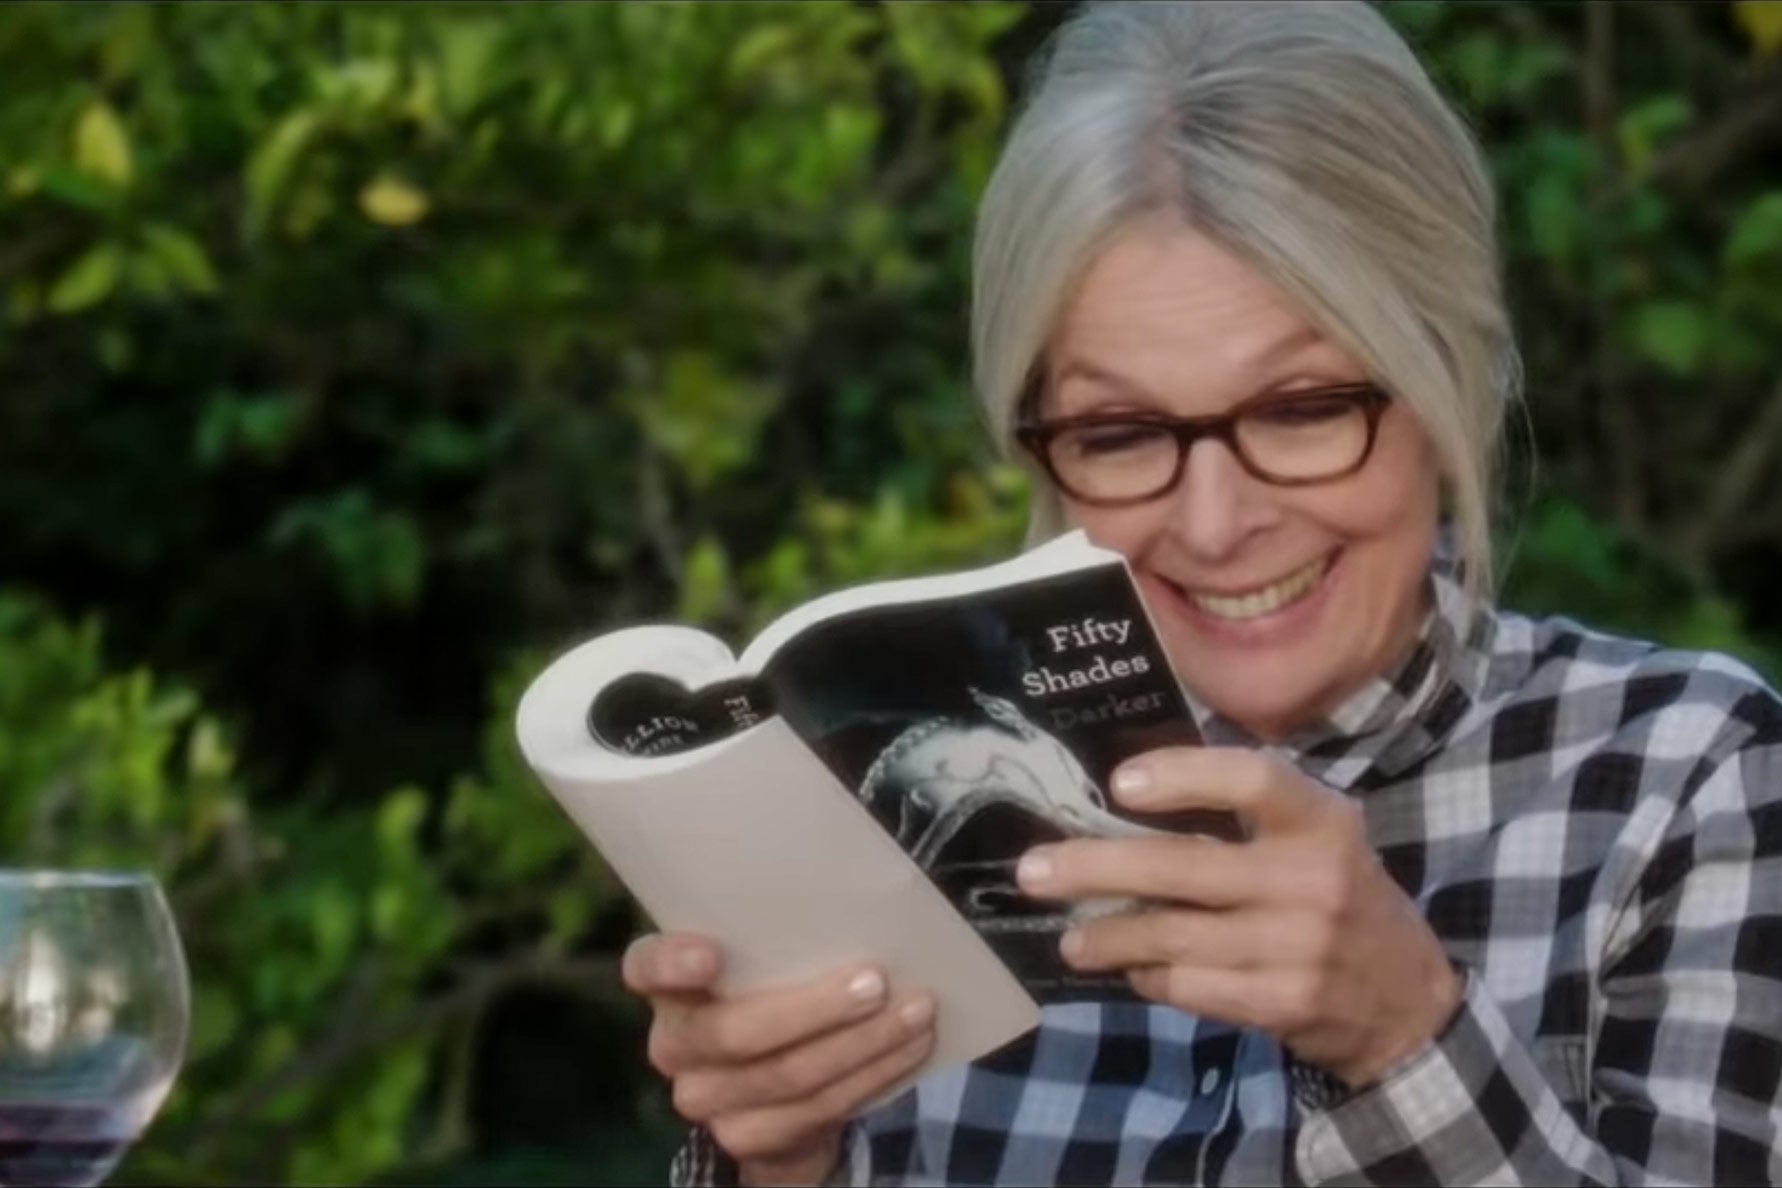 Diane Keaton grins while reading Fifty Shades of Grey in the movie Book Club.